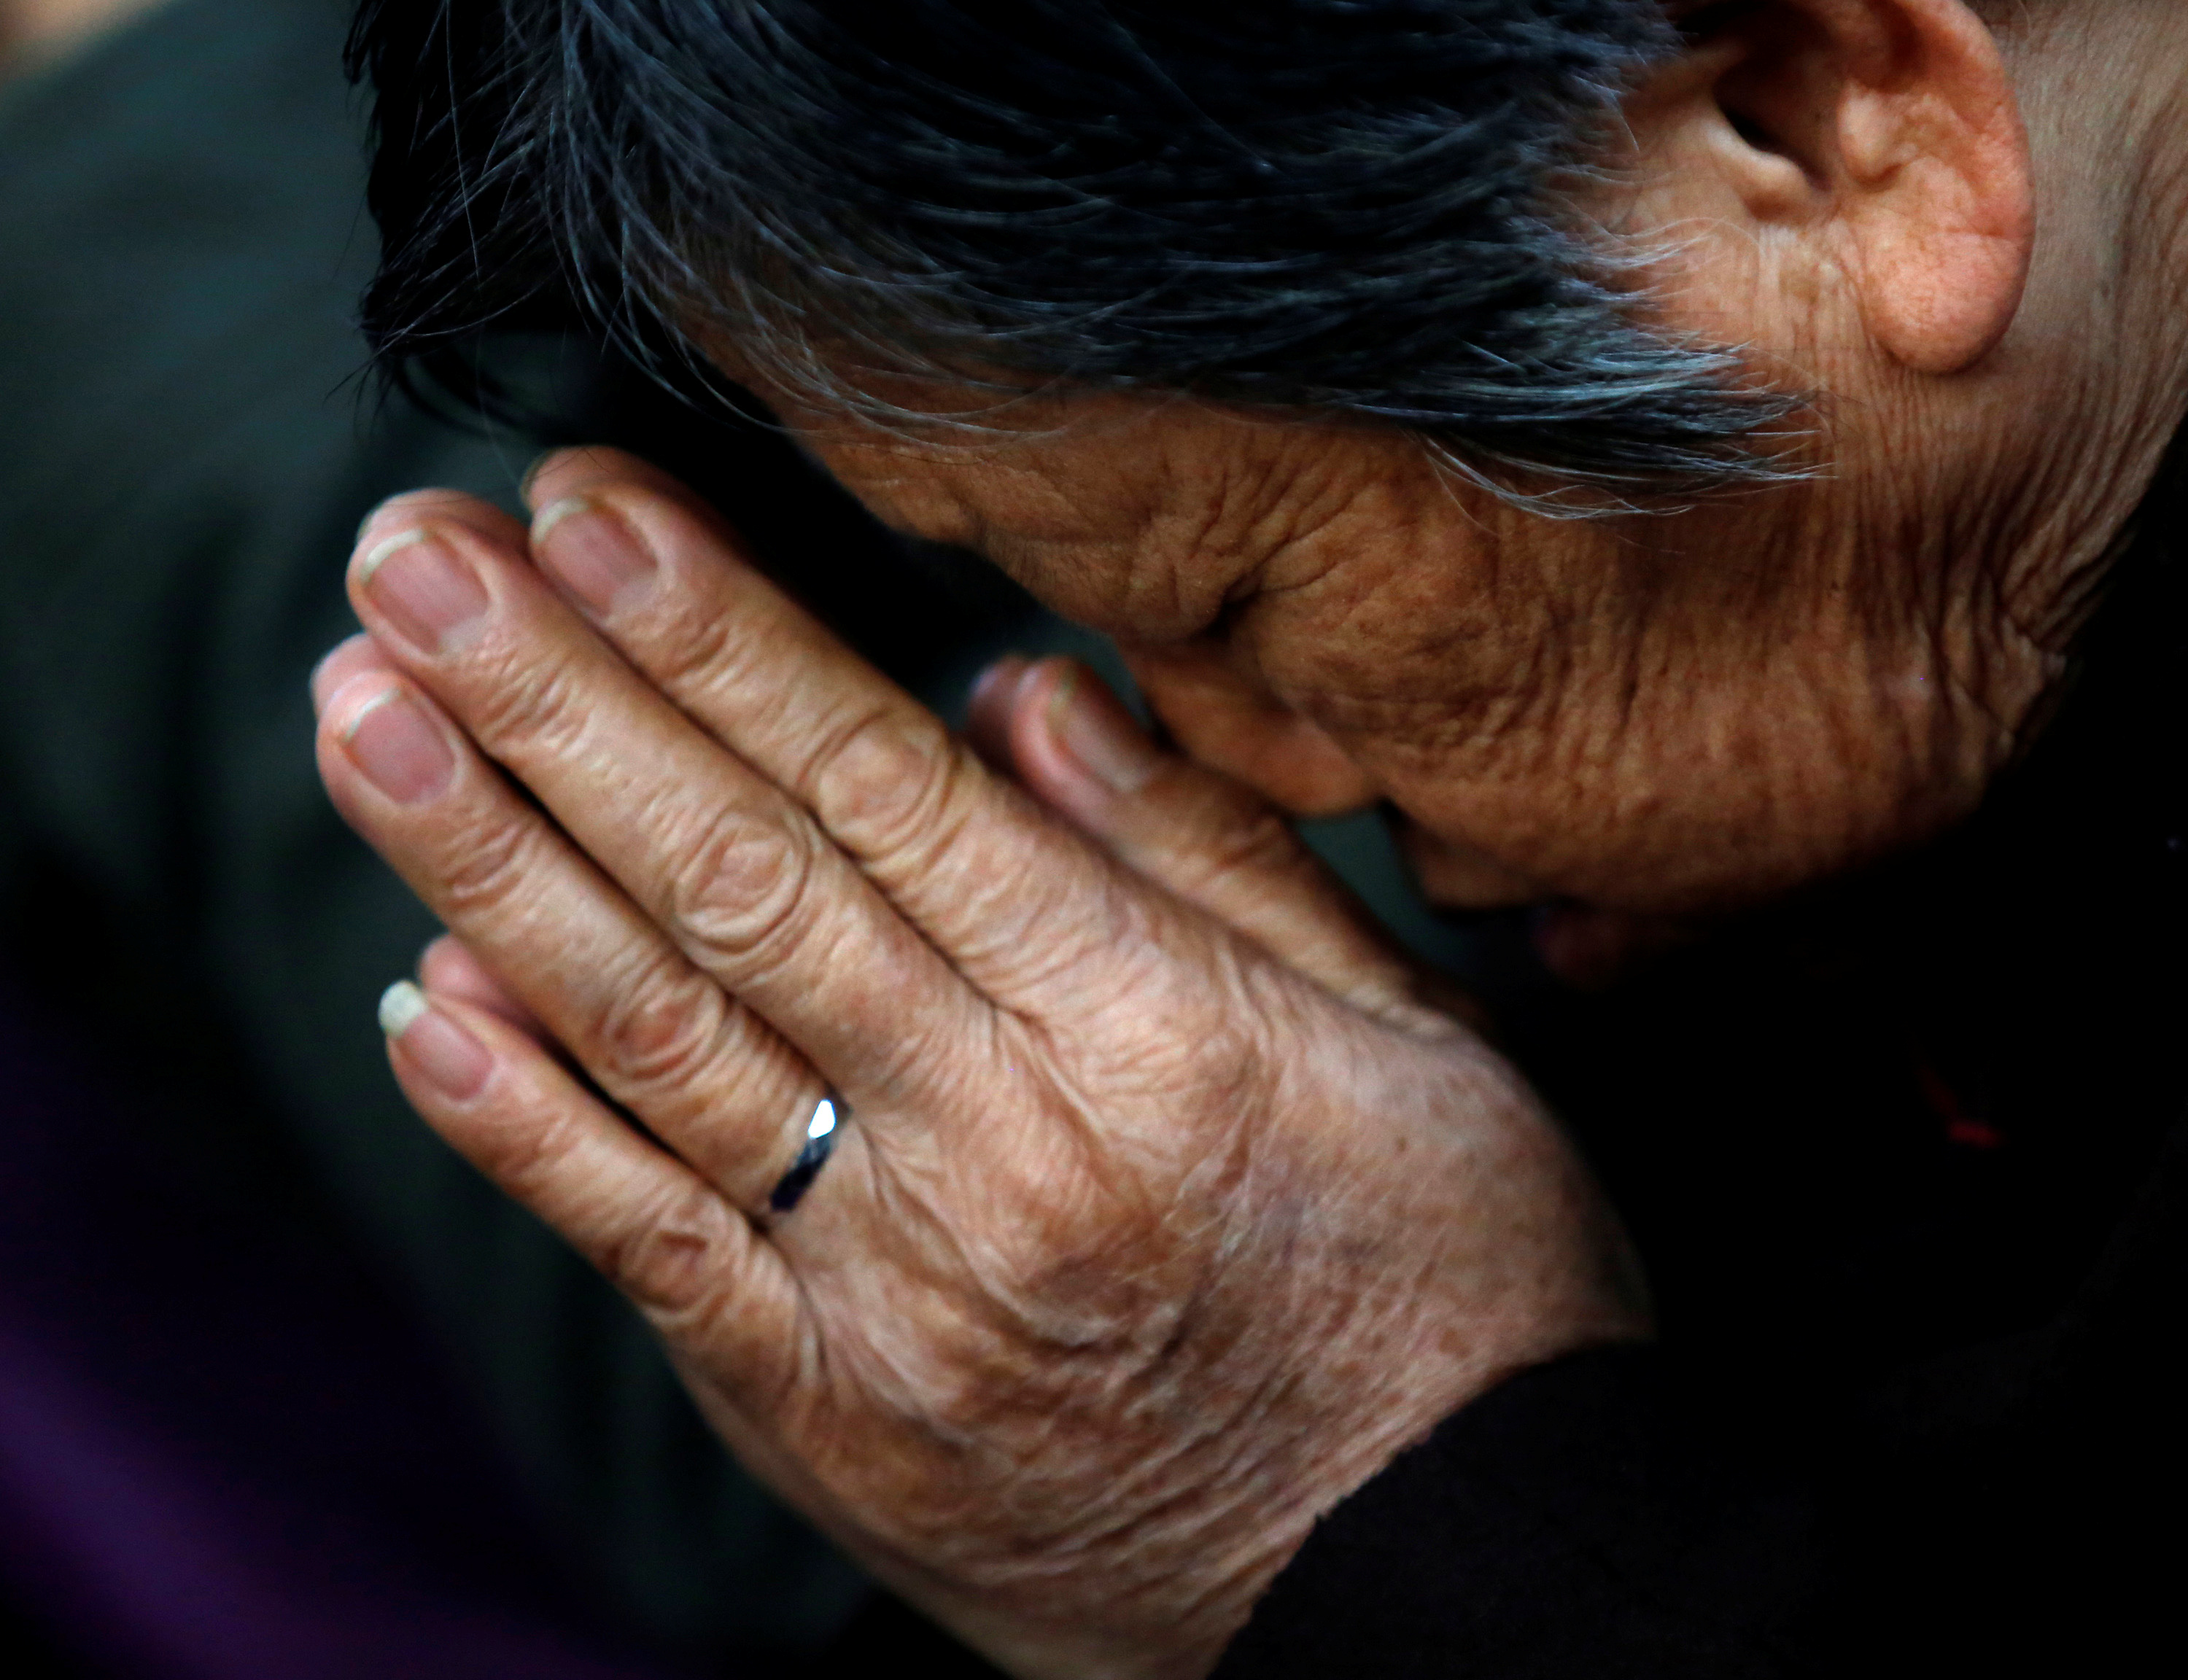 A believer prays during a weekend mass at an underground Catholic church in Tianjin in Nov. 10, 2013. (Kim Kyung Hoon—Reuters)